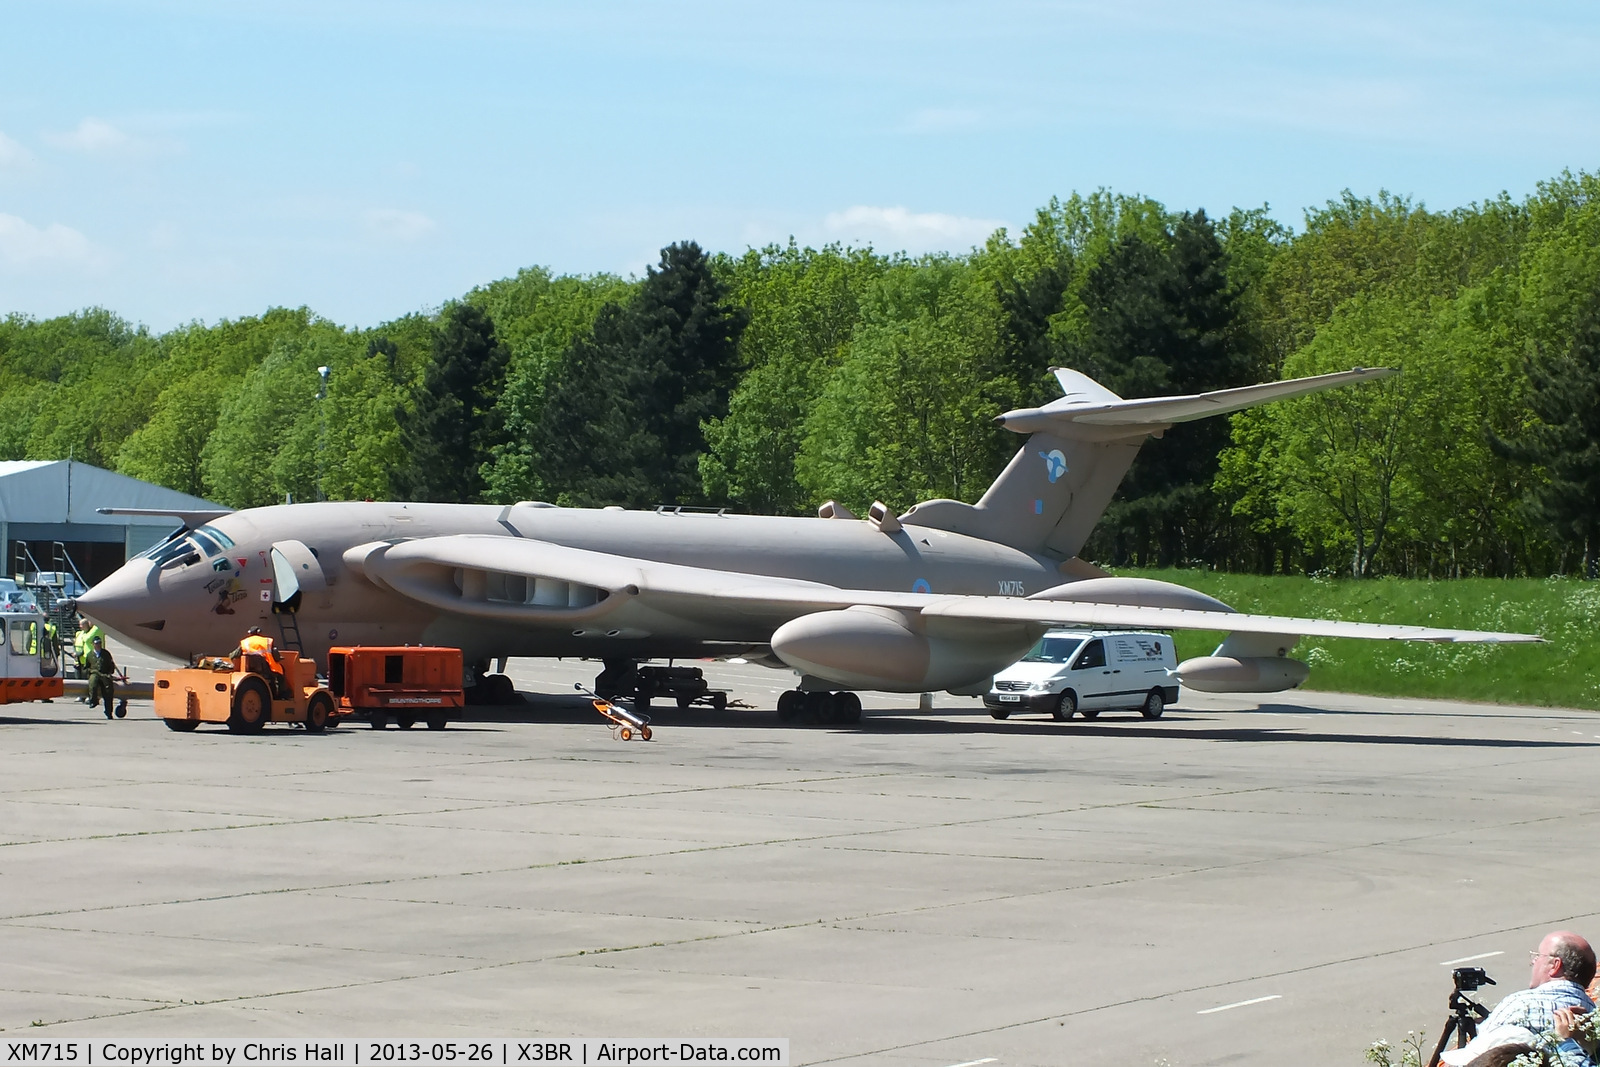 XM715, 1963 Handley Page Victor K.2 C/N HP80/83, at the Cold War Jets open day, Bruntingthorpe